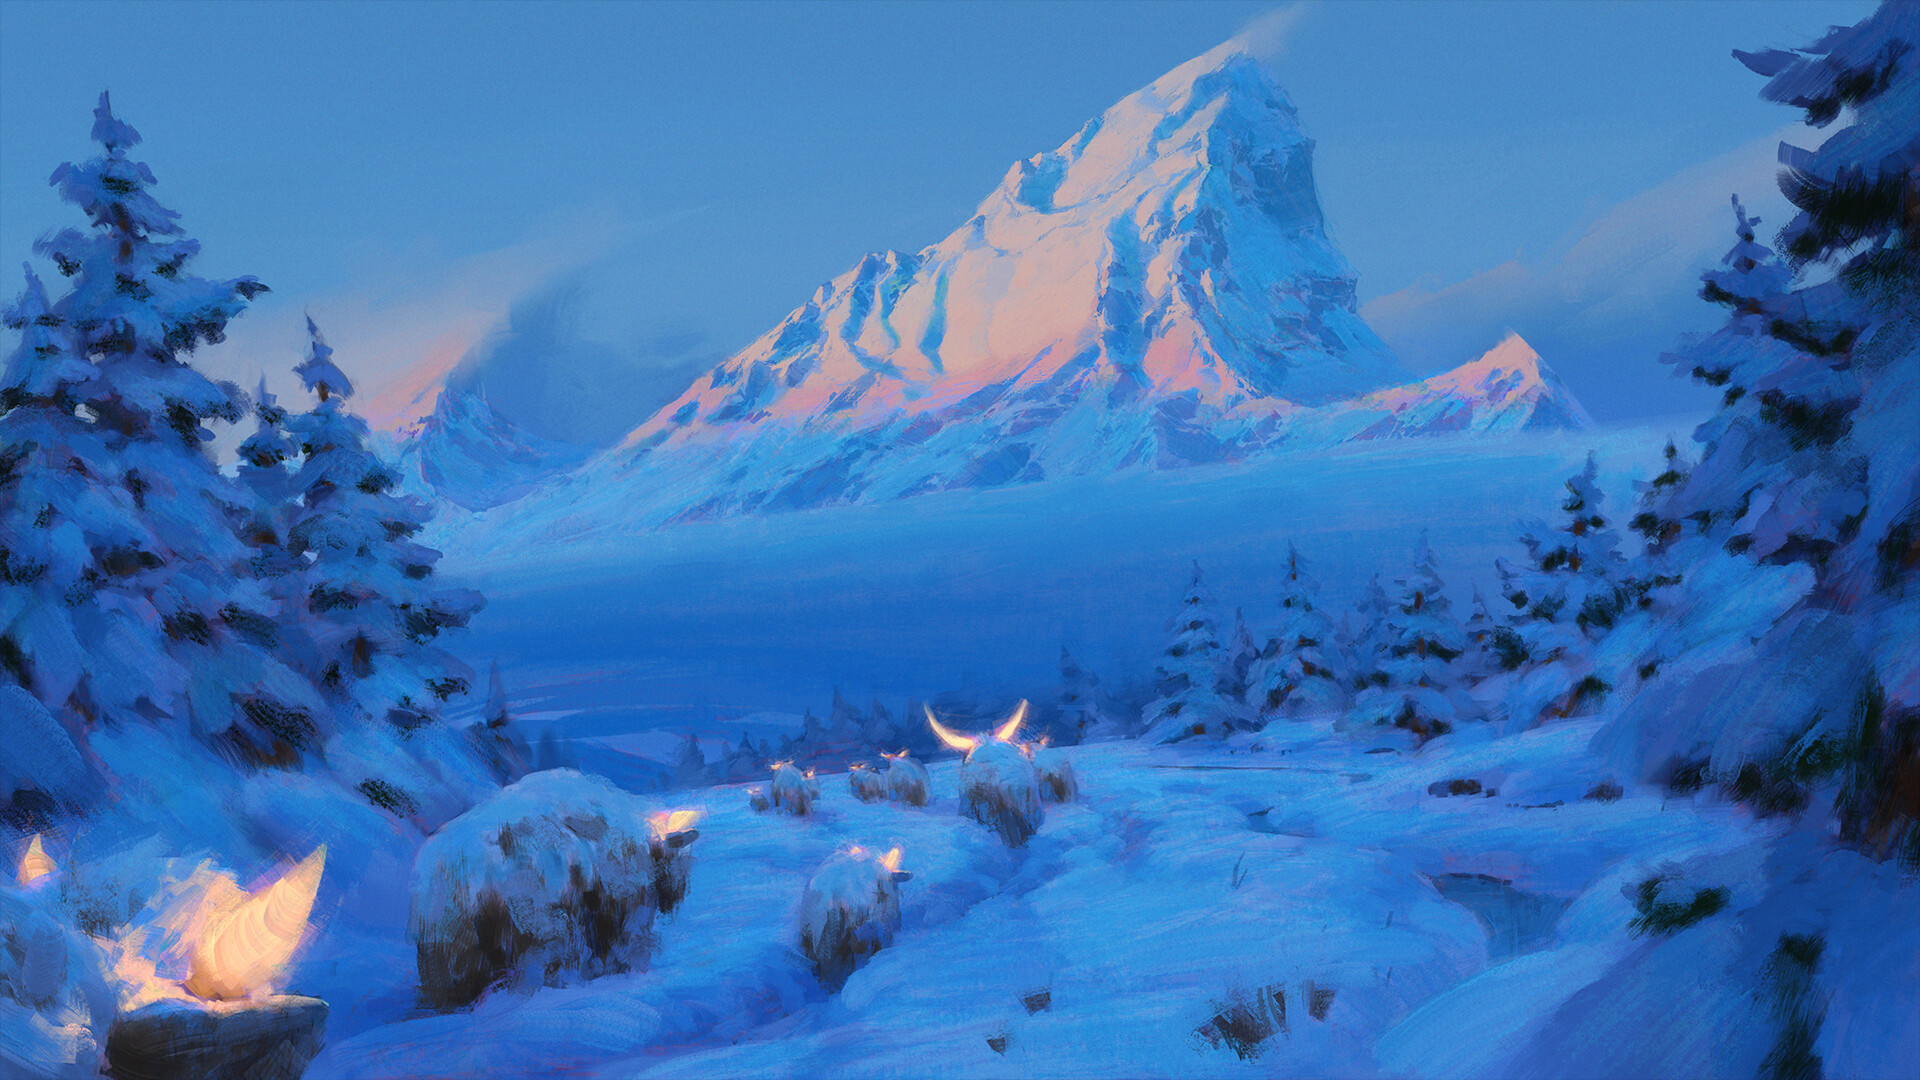 General 1920x1080 environment glowing horns mountains snow trees bison fantasy art artwork nature